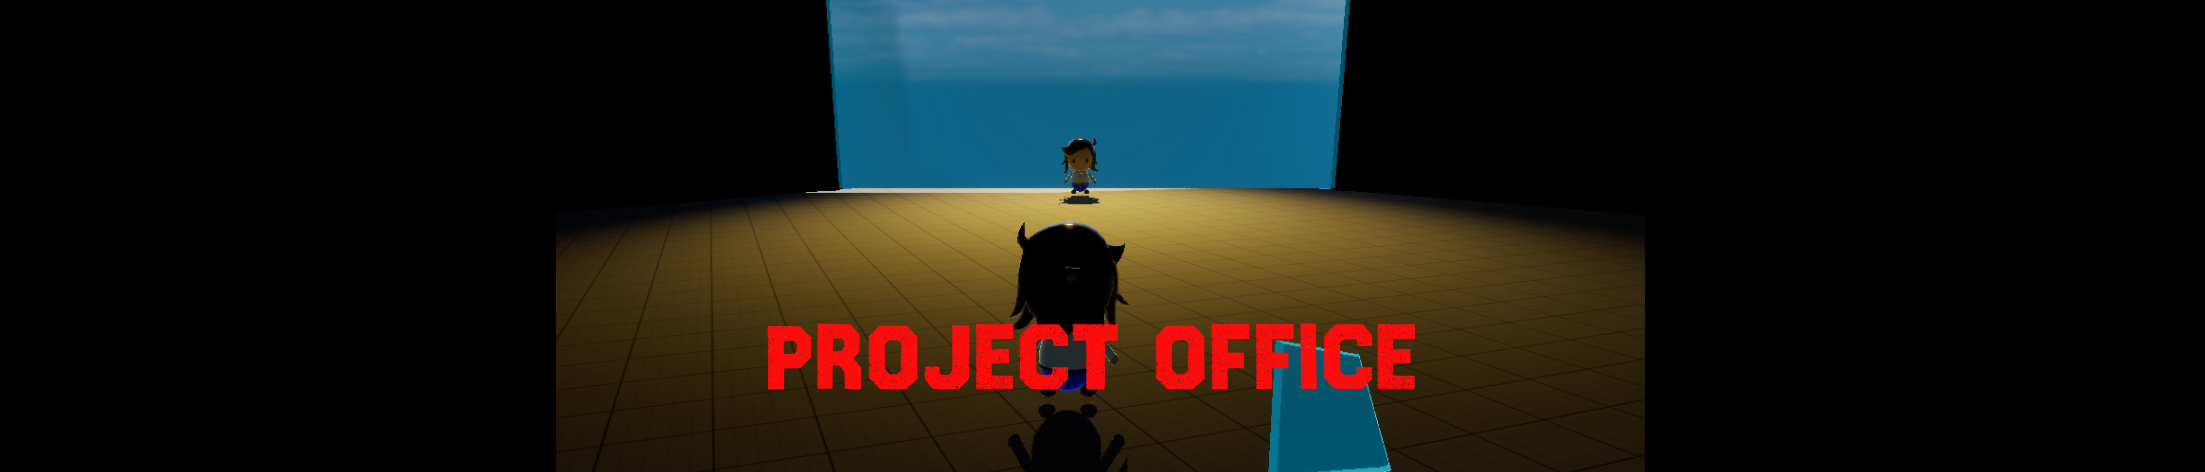 Project Office